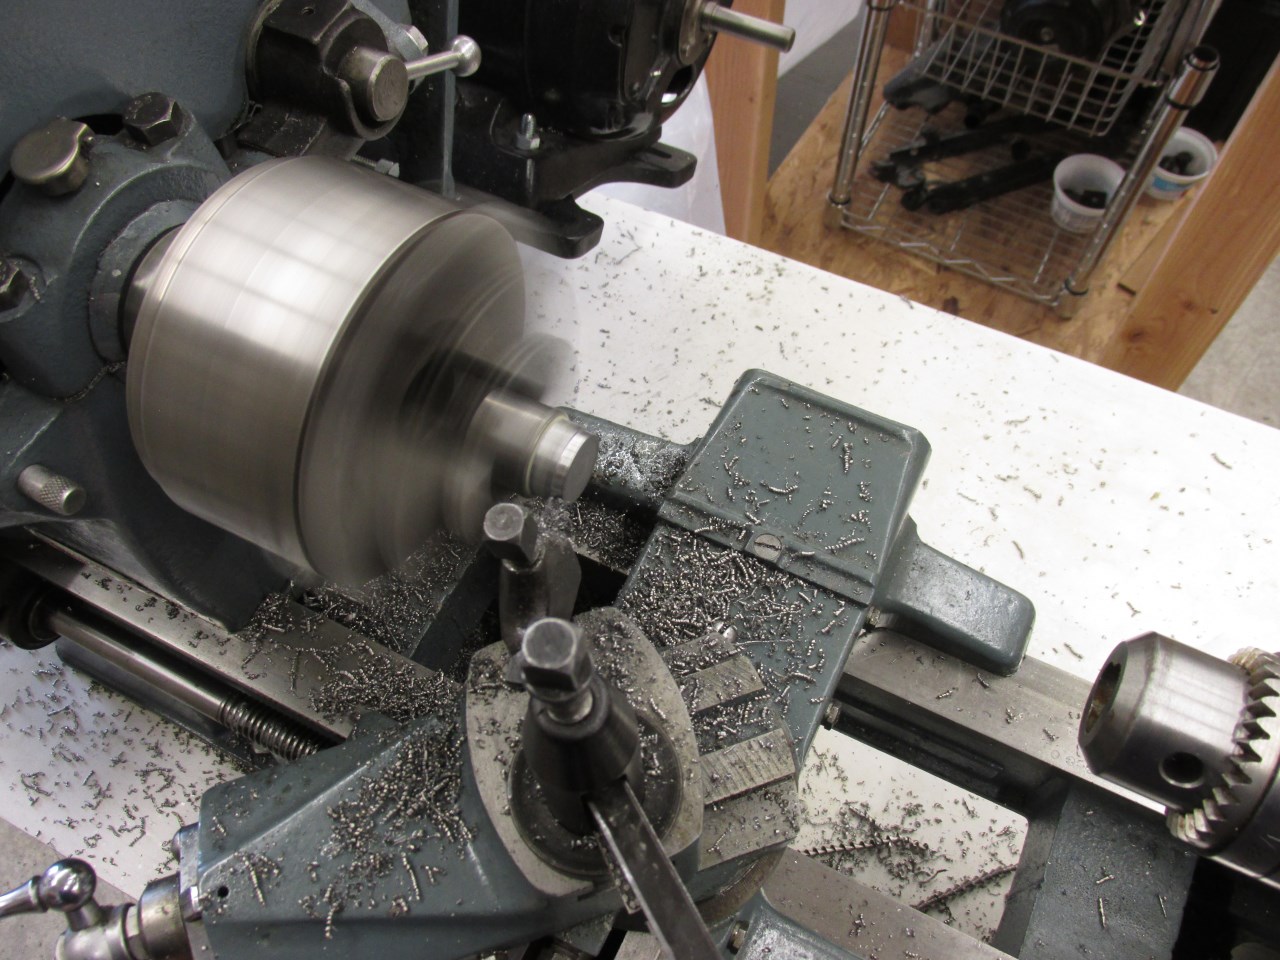 Turning rod end spacers on lathe